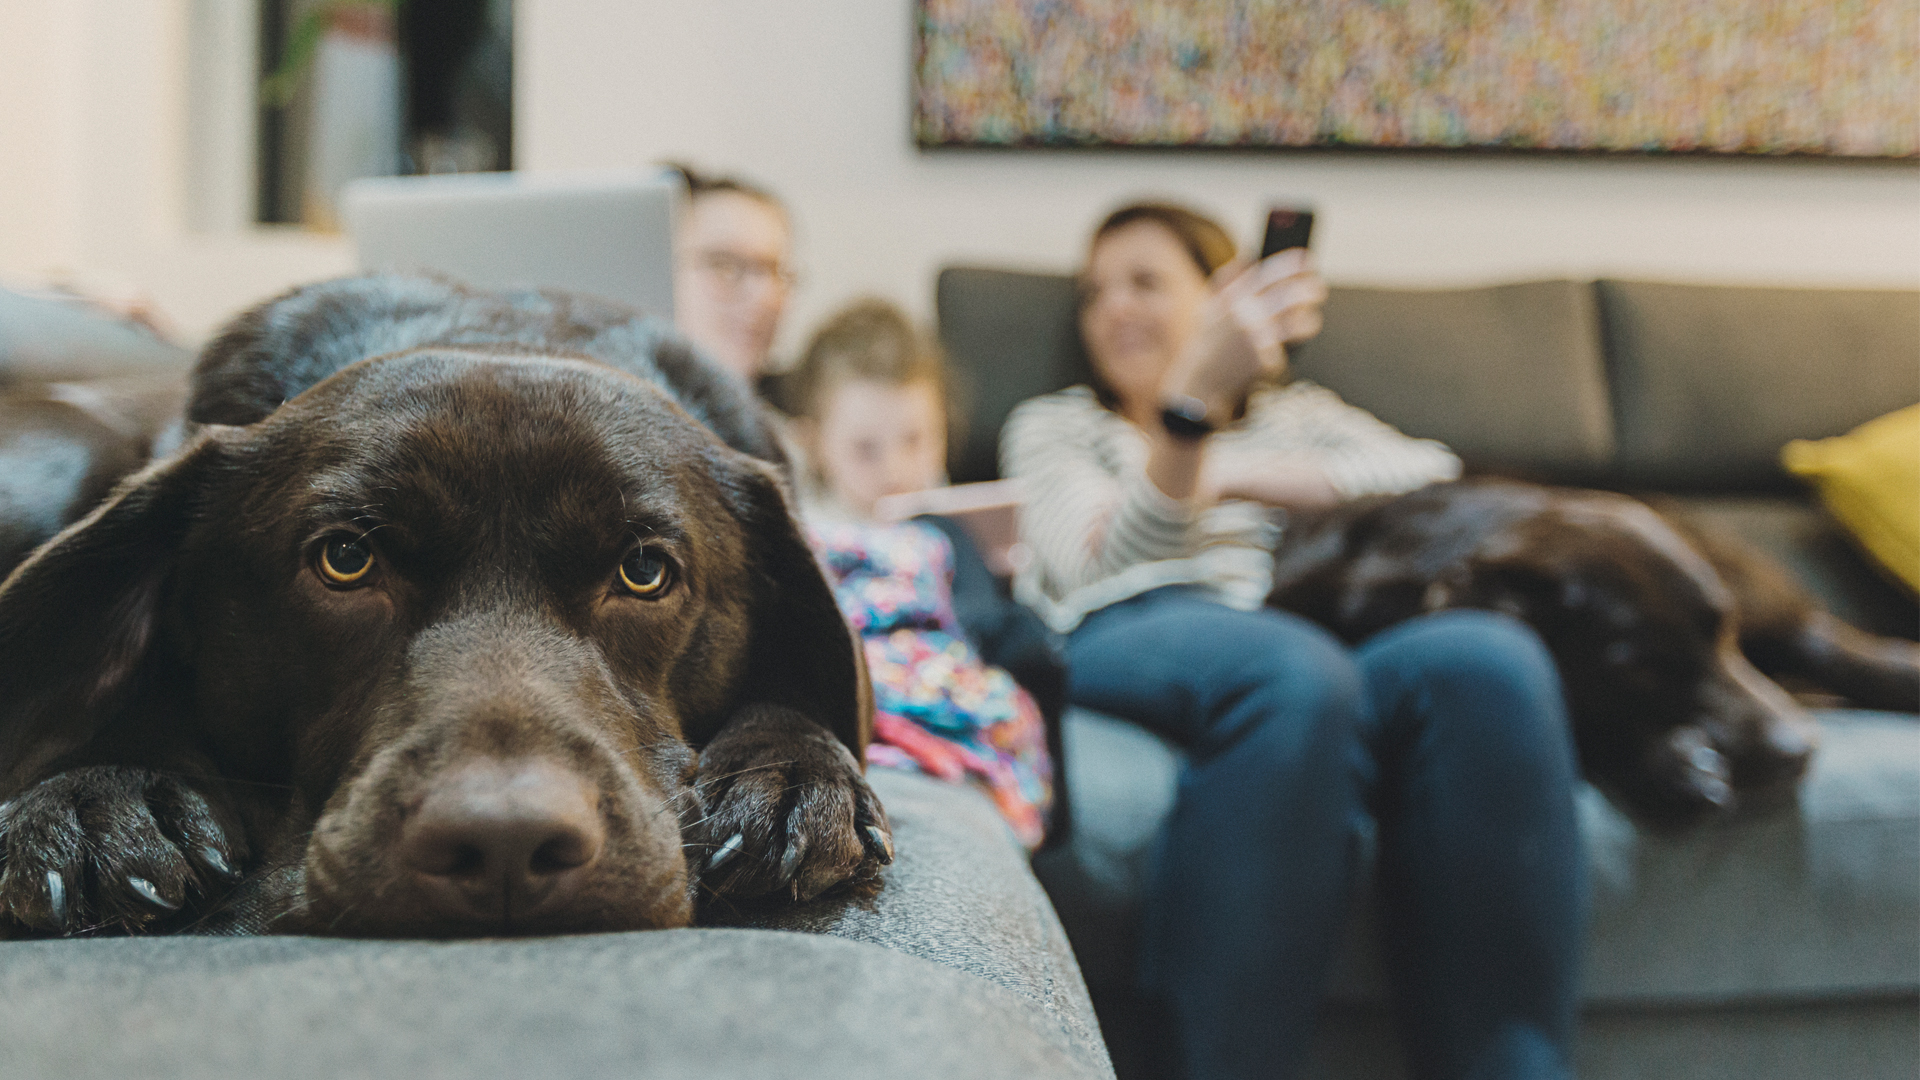 How to clean the air in your home: an image of a dog and a family on sofas